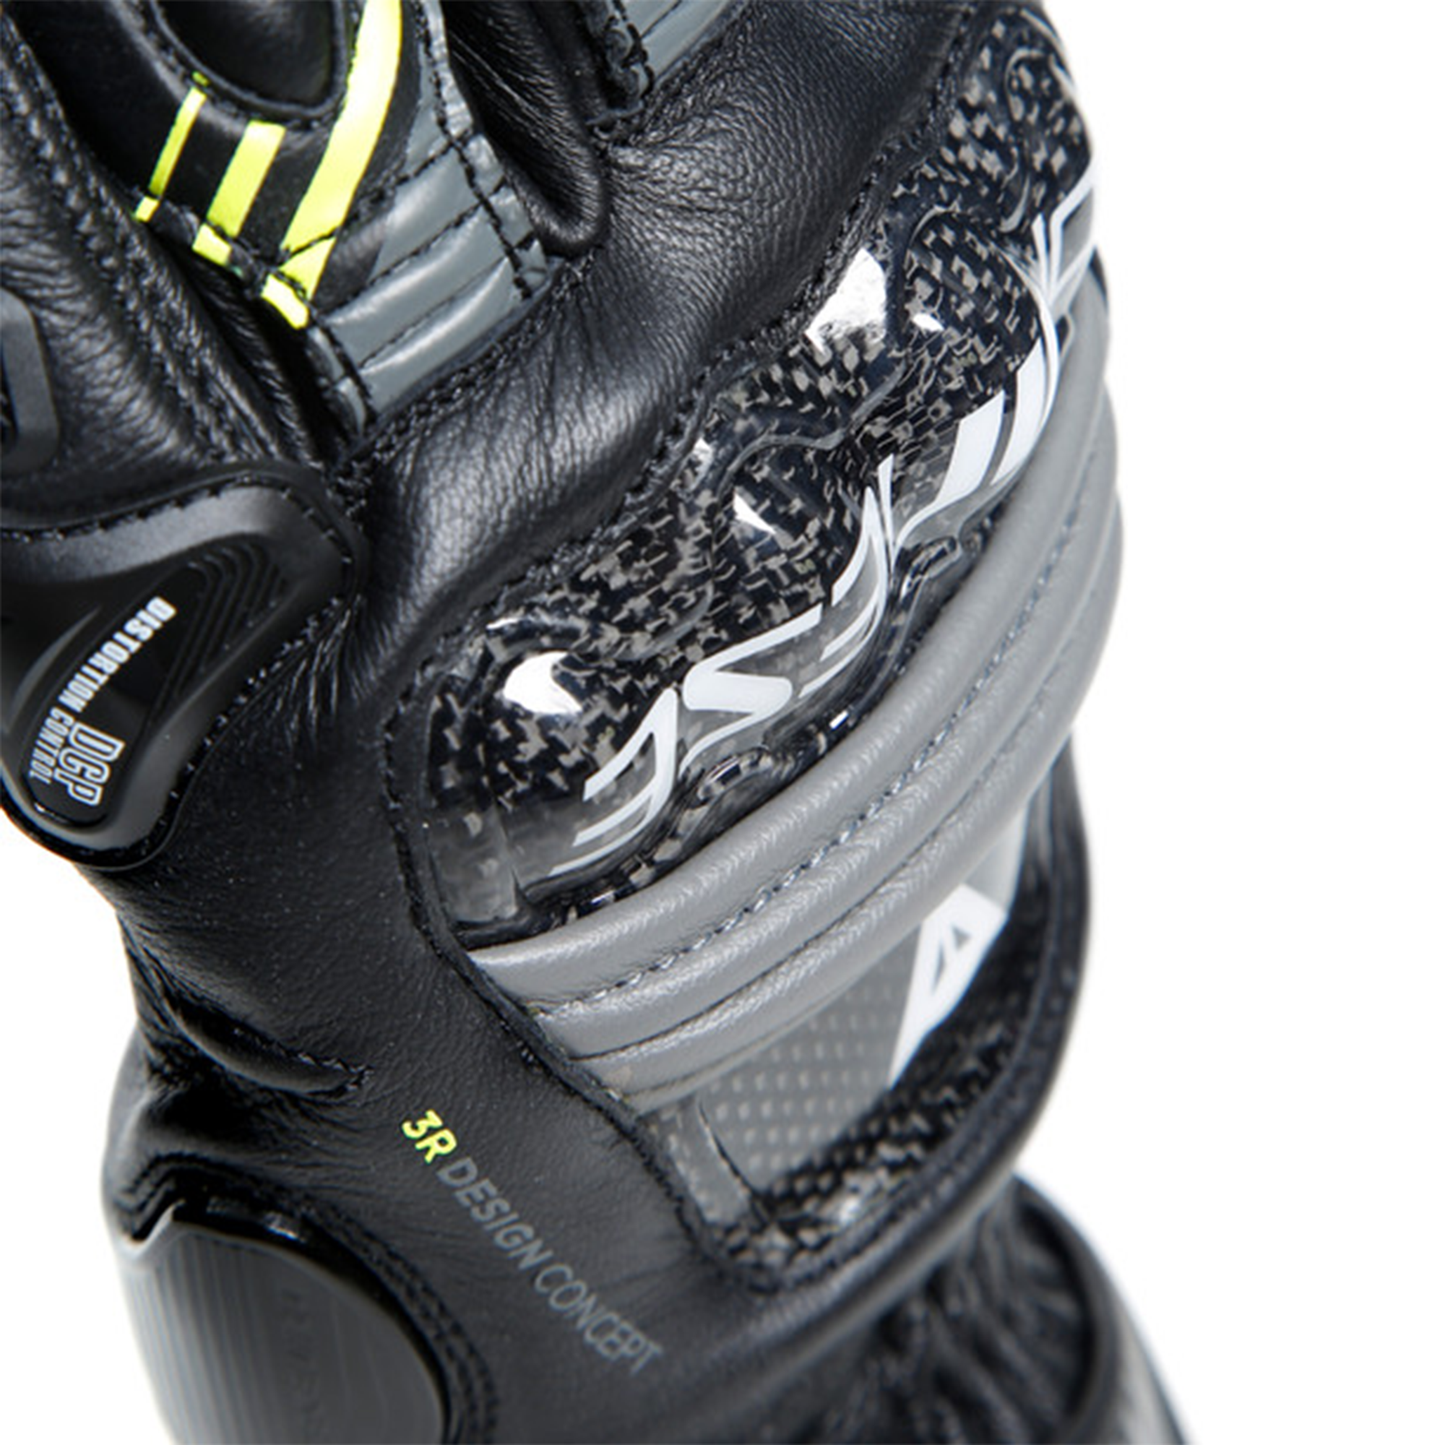 Dainese Druid 4 Leather - Black/Charcoal Grey/Flo Yellow